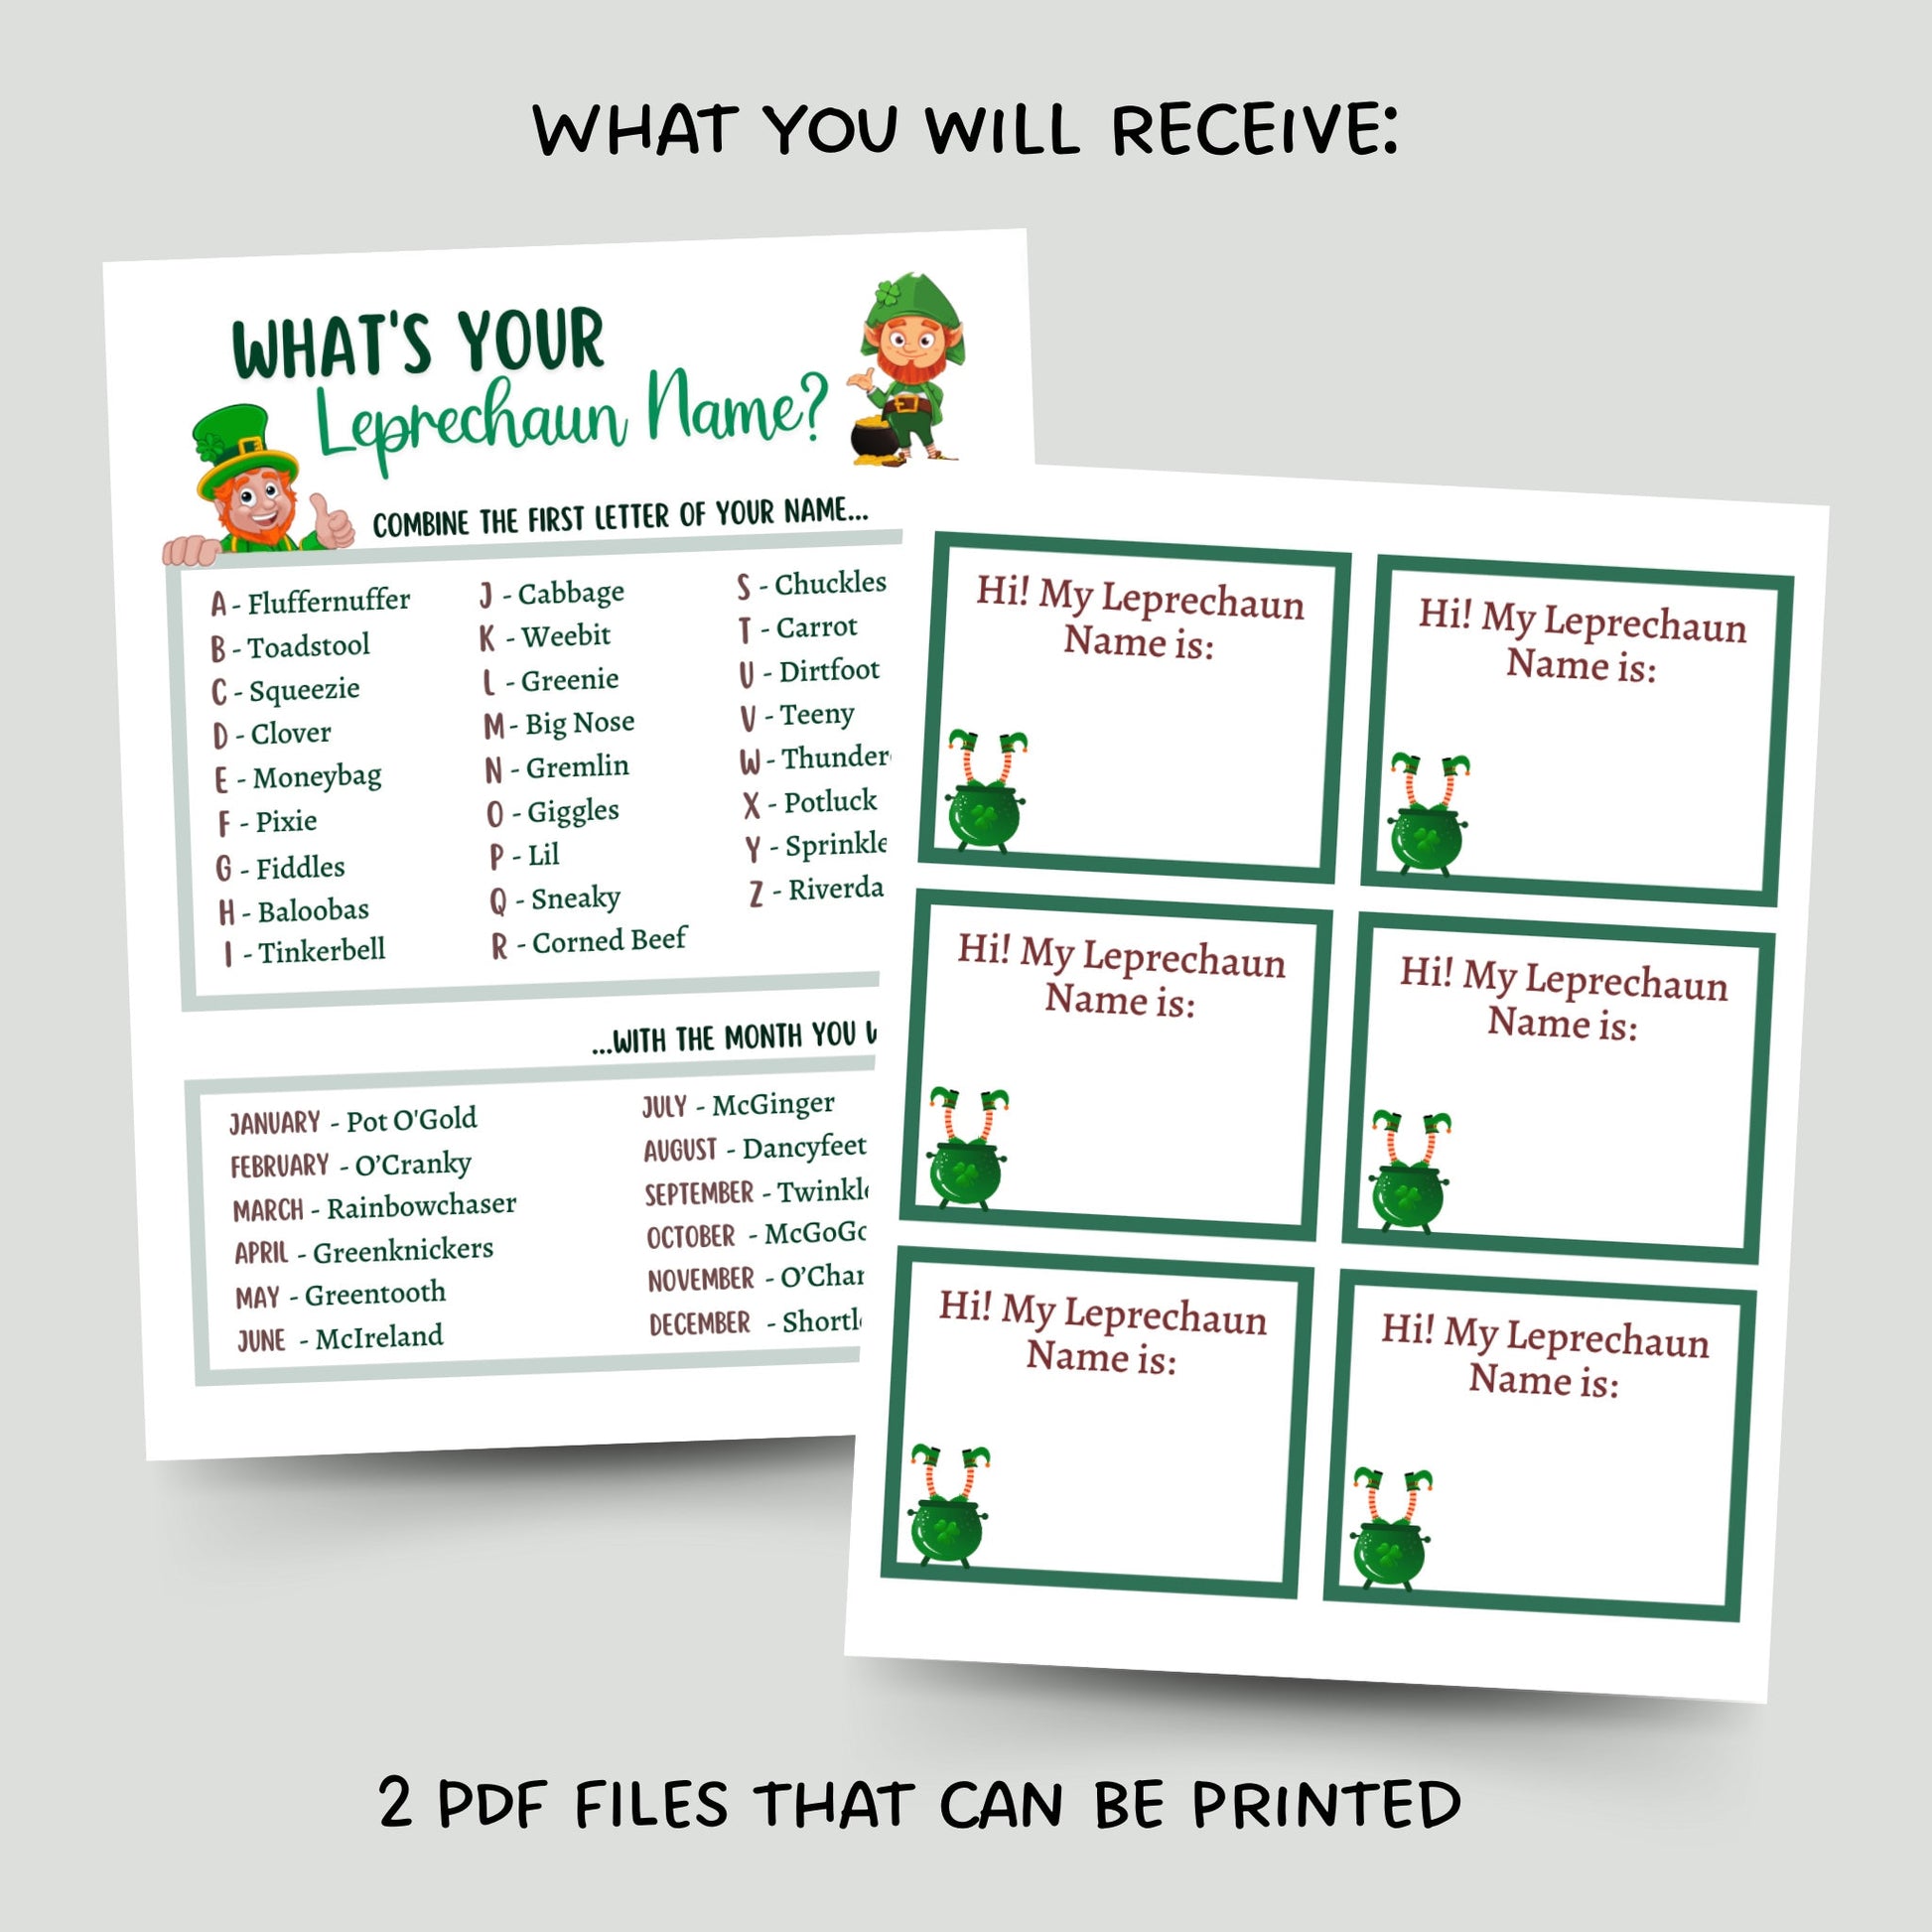 What's Your Leprechaun Name Game Printable, St. Patrick's Day Party Game, Classroom Games, St. Patty's Day Name Tags Kids Adults, St. Paddy